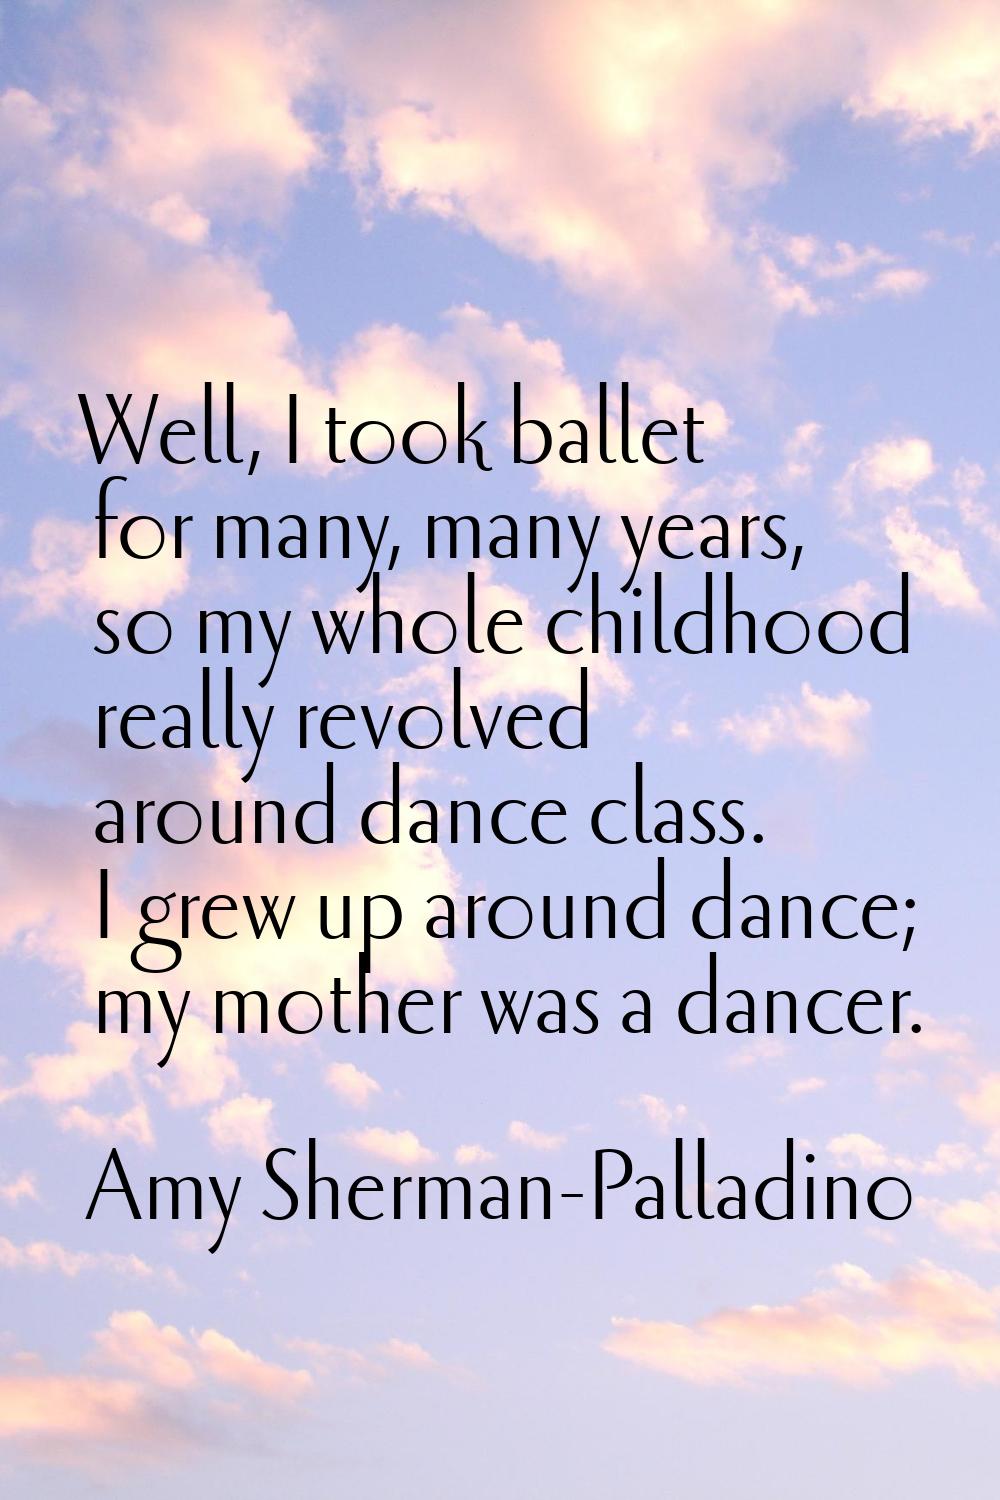 Well, I took ballet for many, many years, so my whole childhood really revolved around dance class.